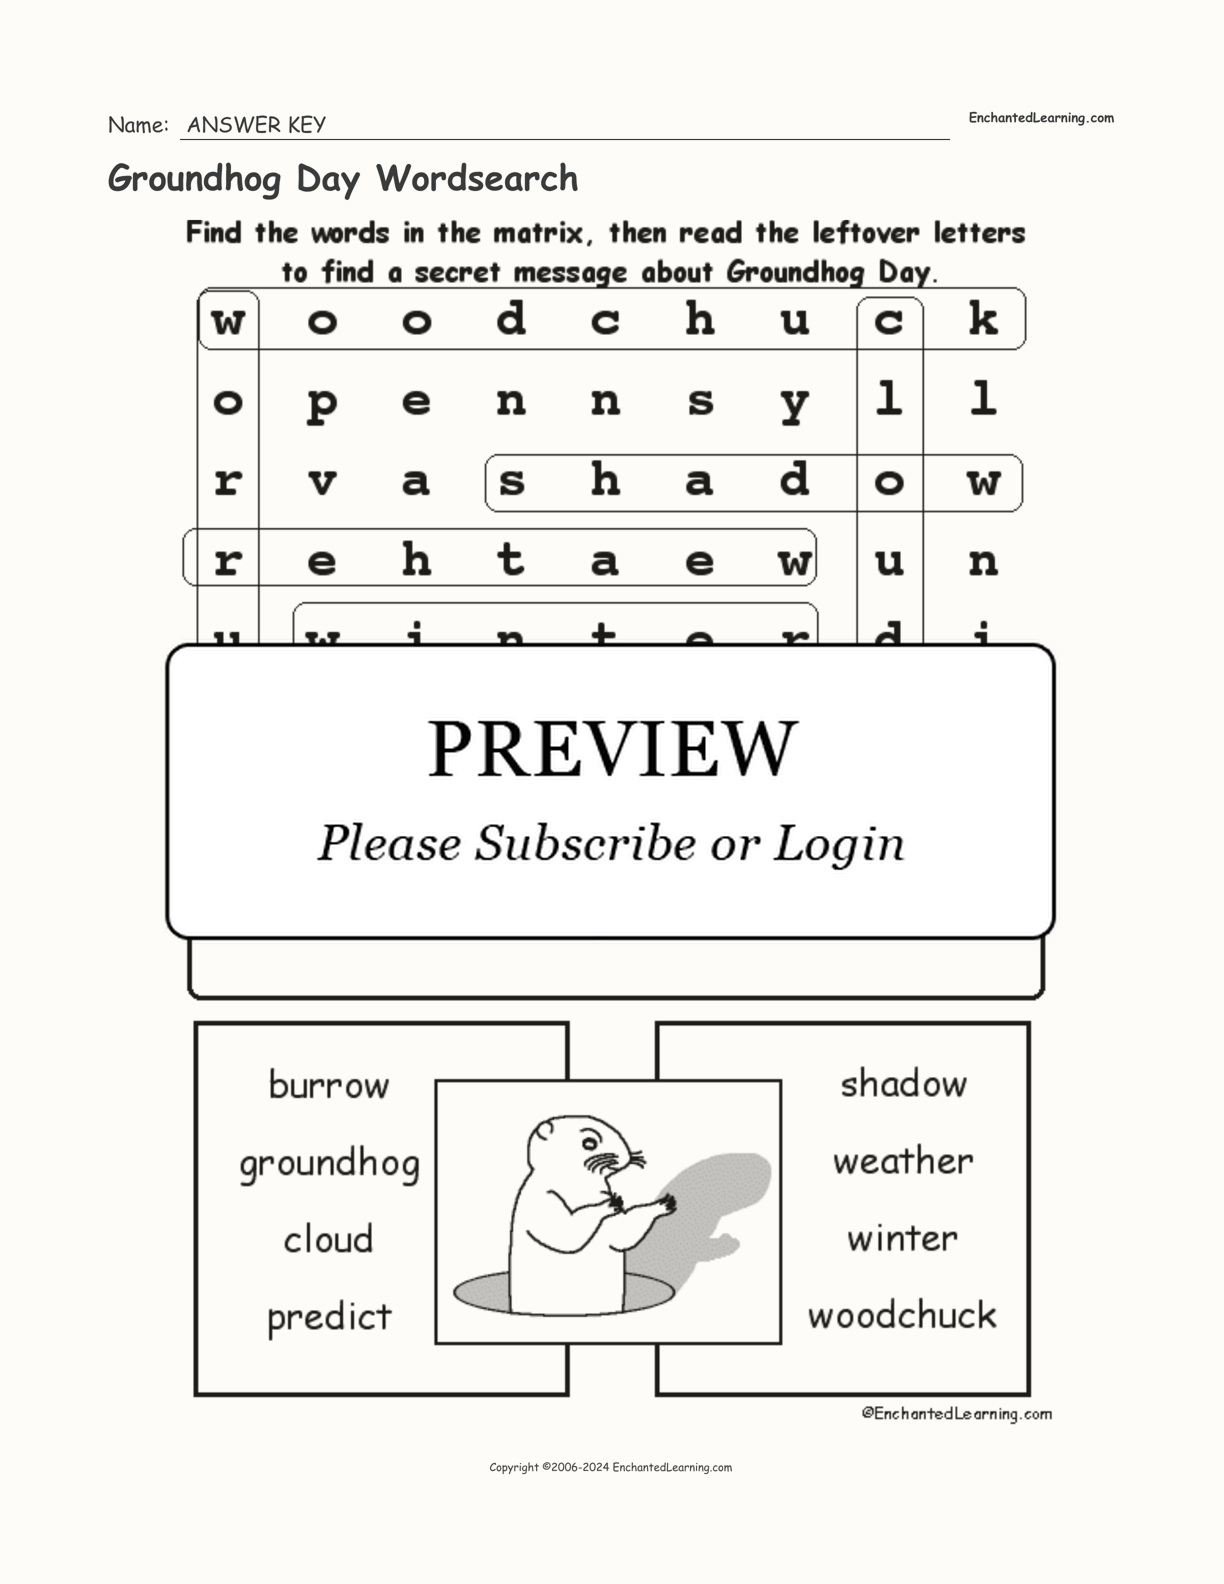 Groundhog Day Wordsearch interactive worksheet page 2